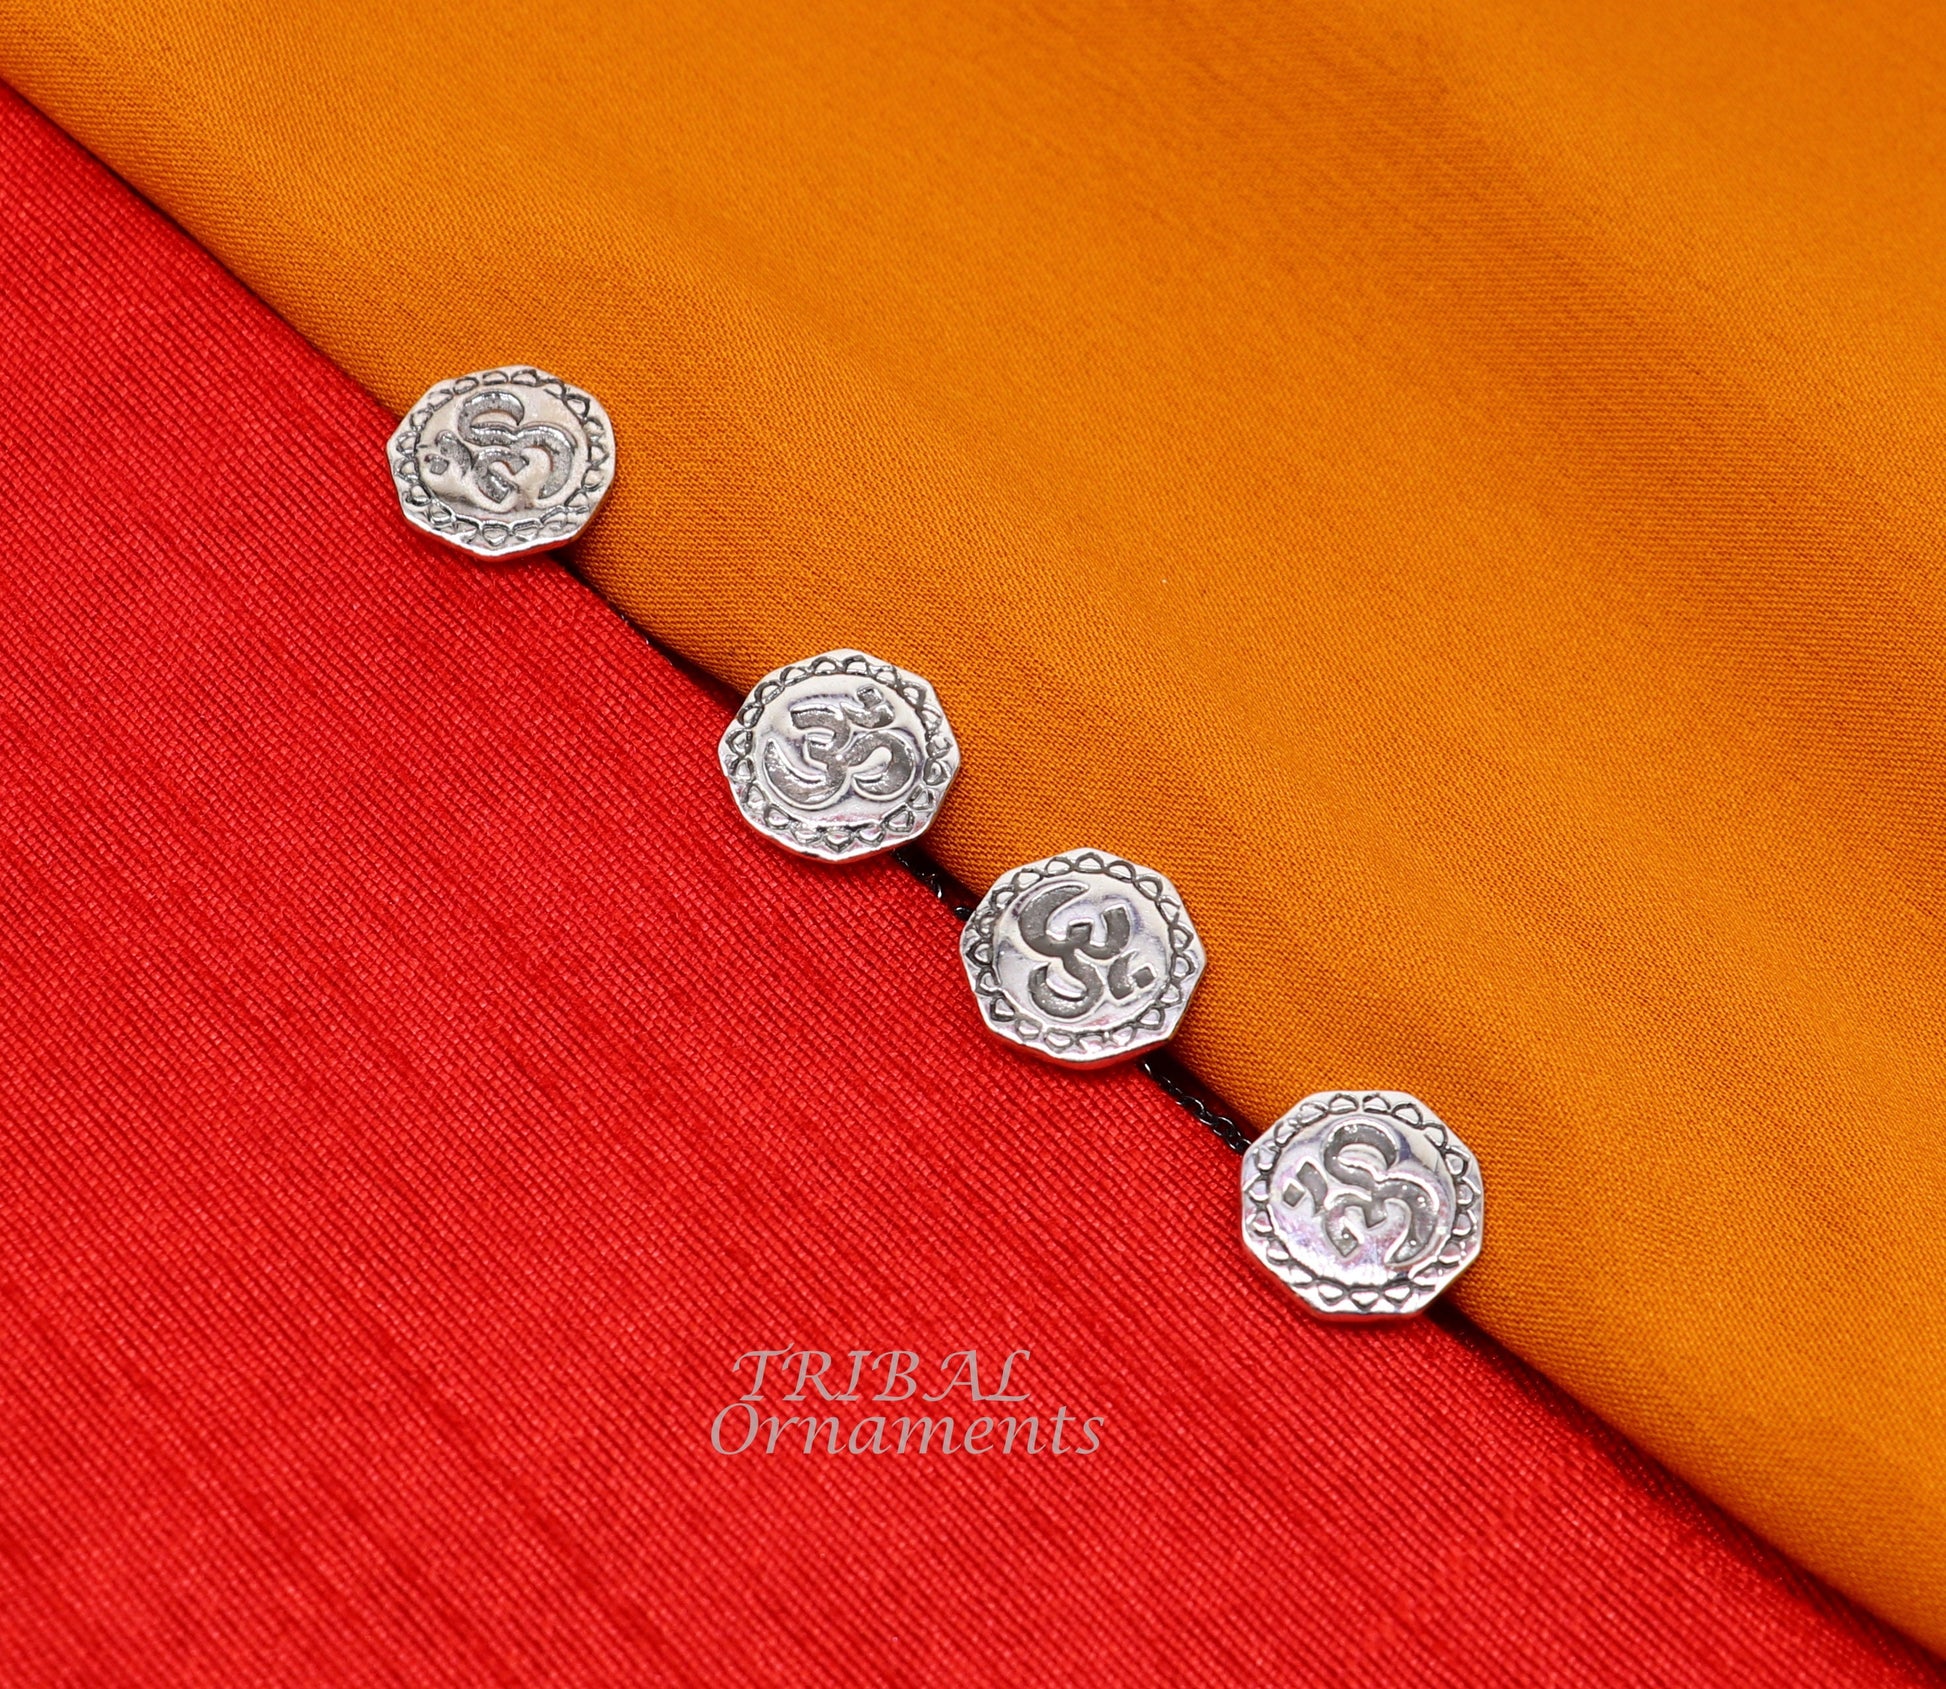 925 Sterling silver handmade gorgeous sign Aum or OM design buttons or cufflinks  for men's kurta, best gifting jewelry occasions btn03 - TRIBAL ORNAMENTS